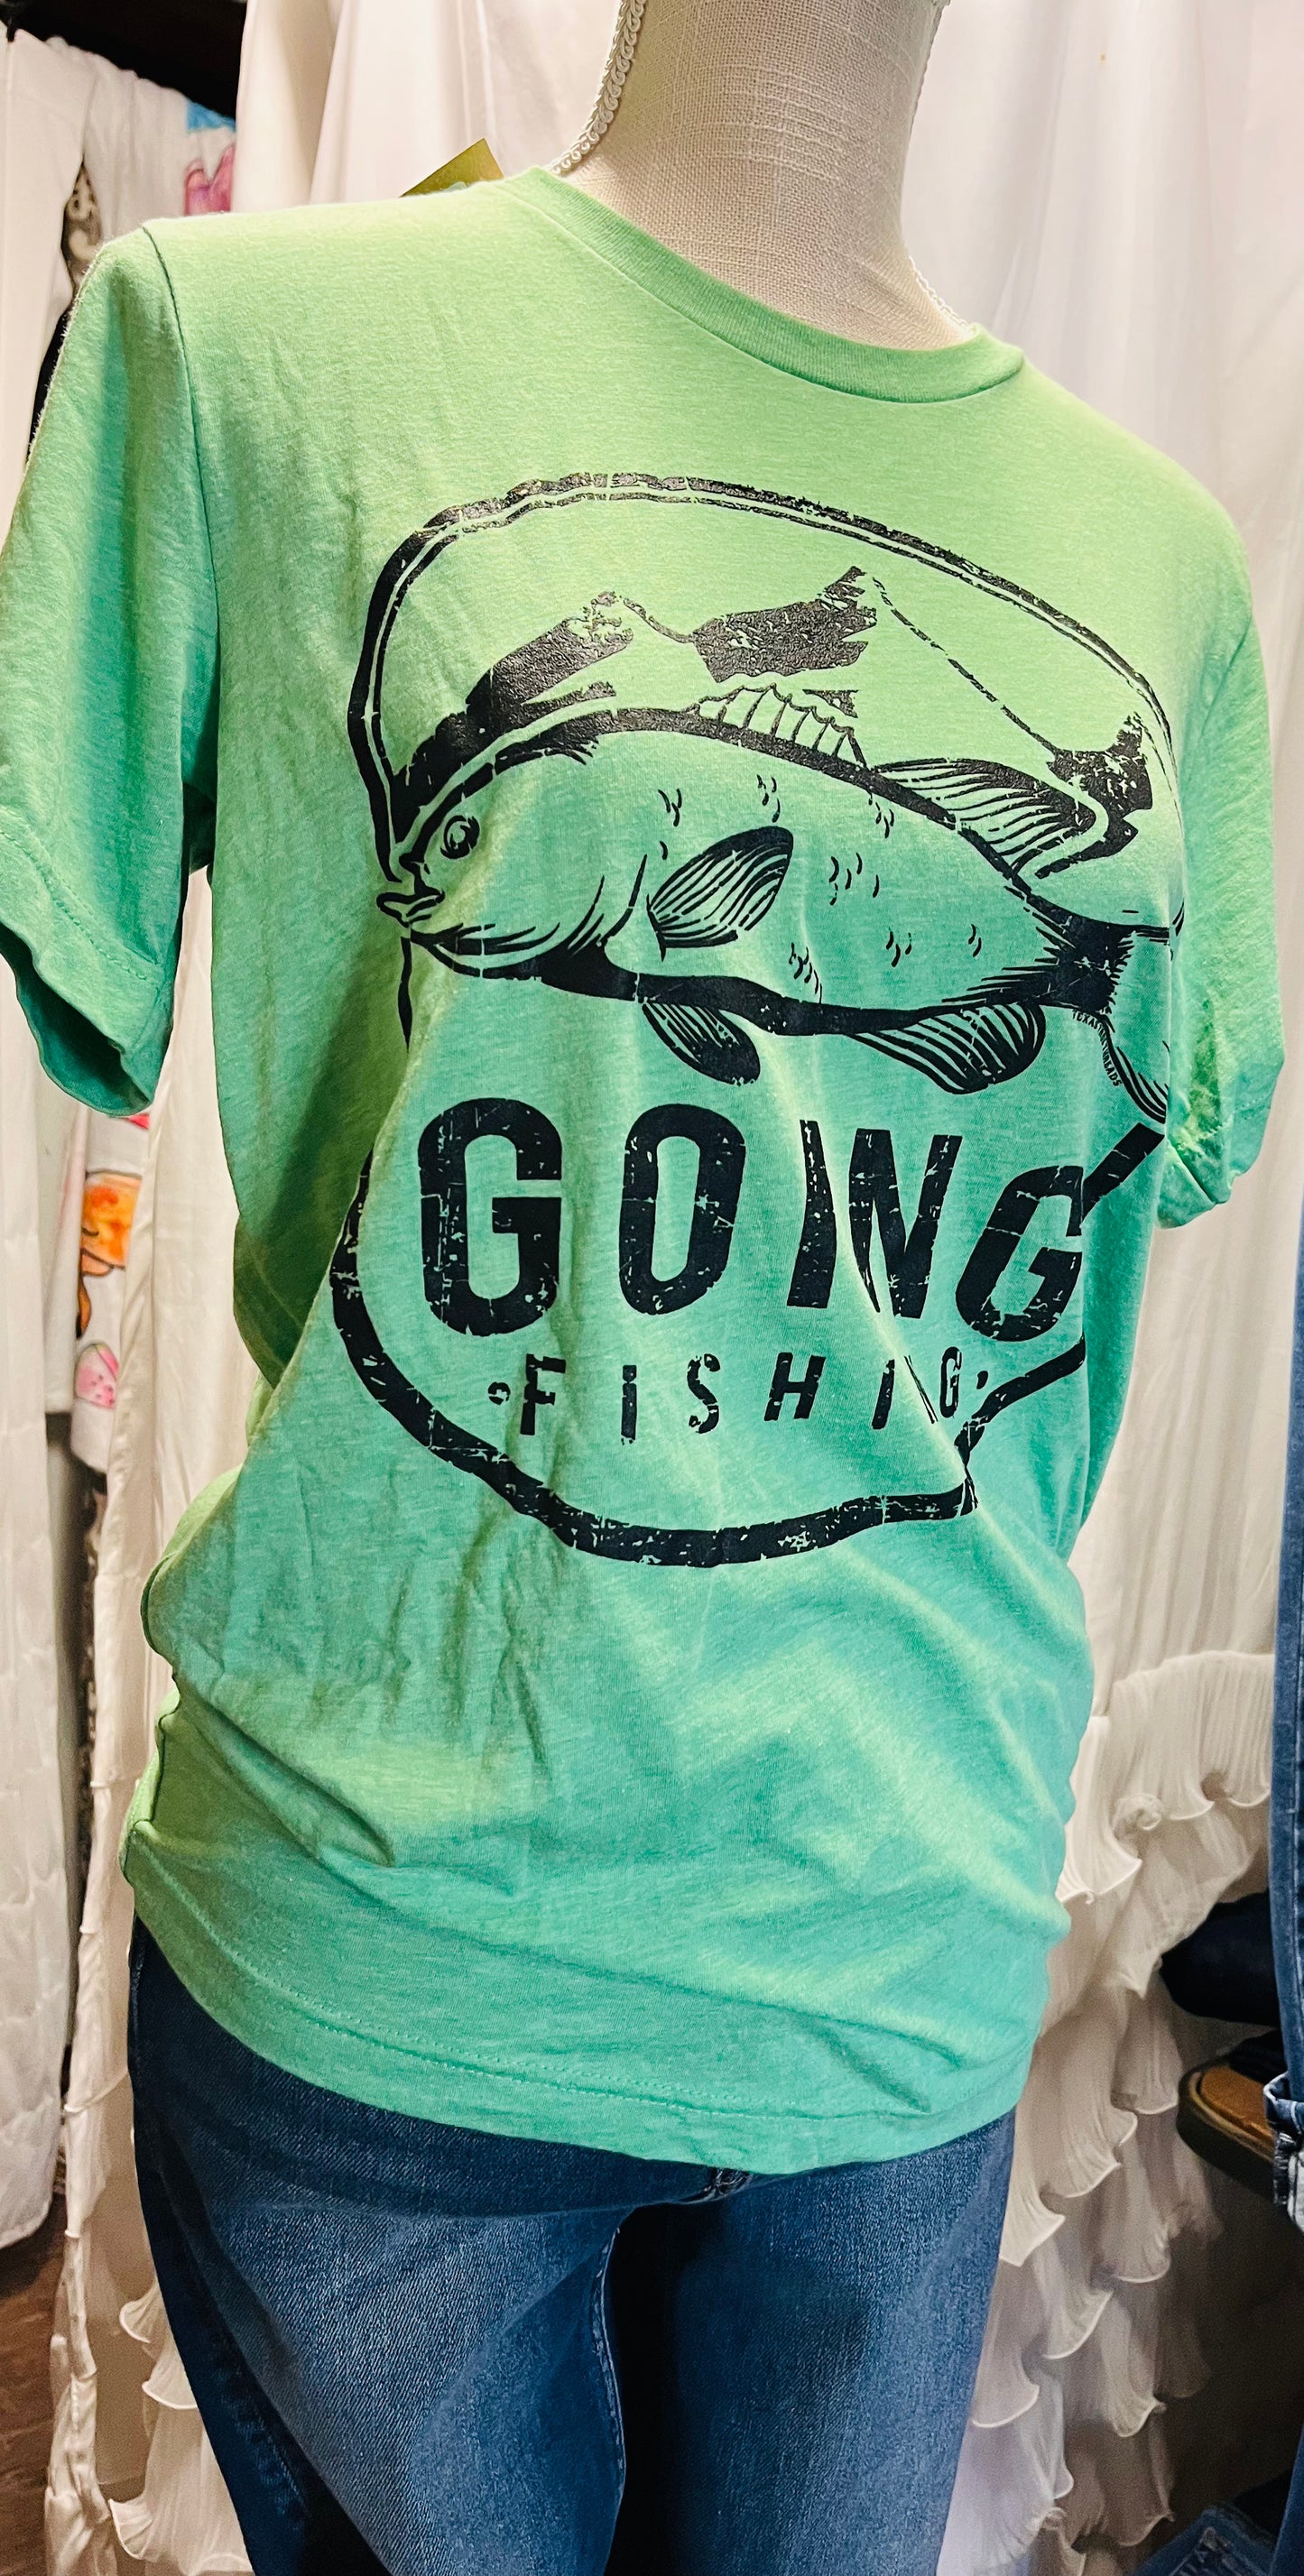 Going Fishing - 30% off!